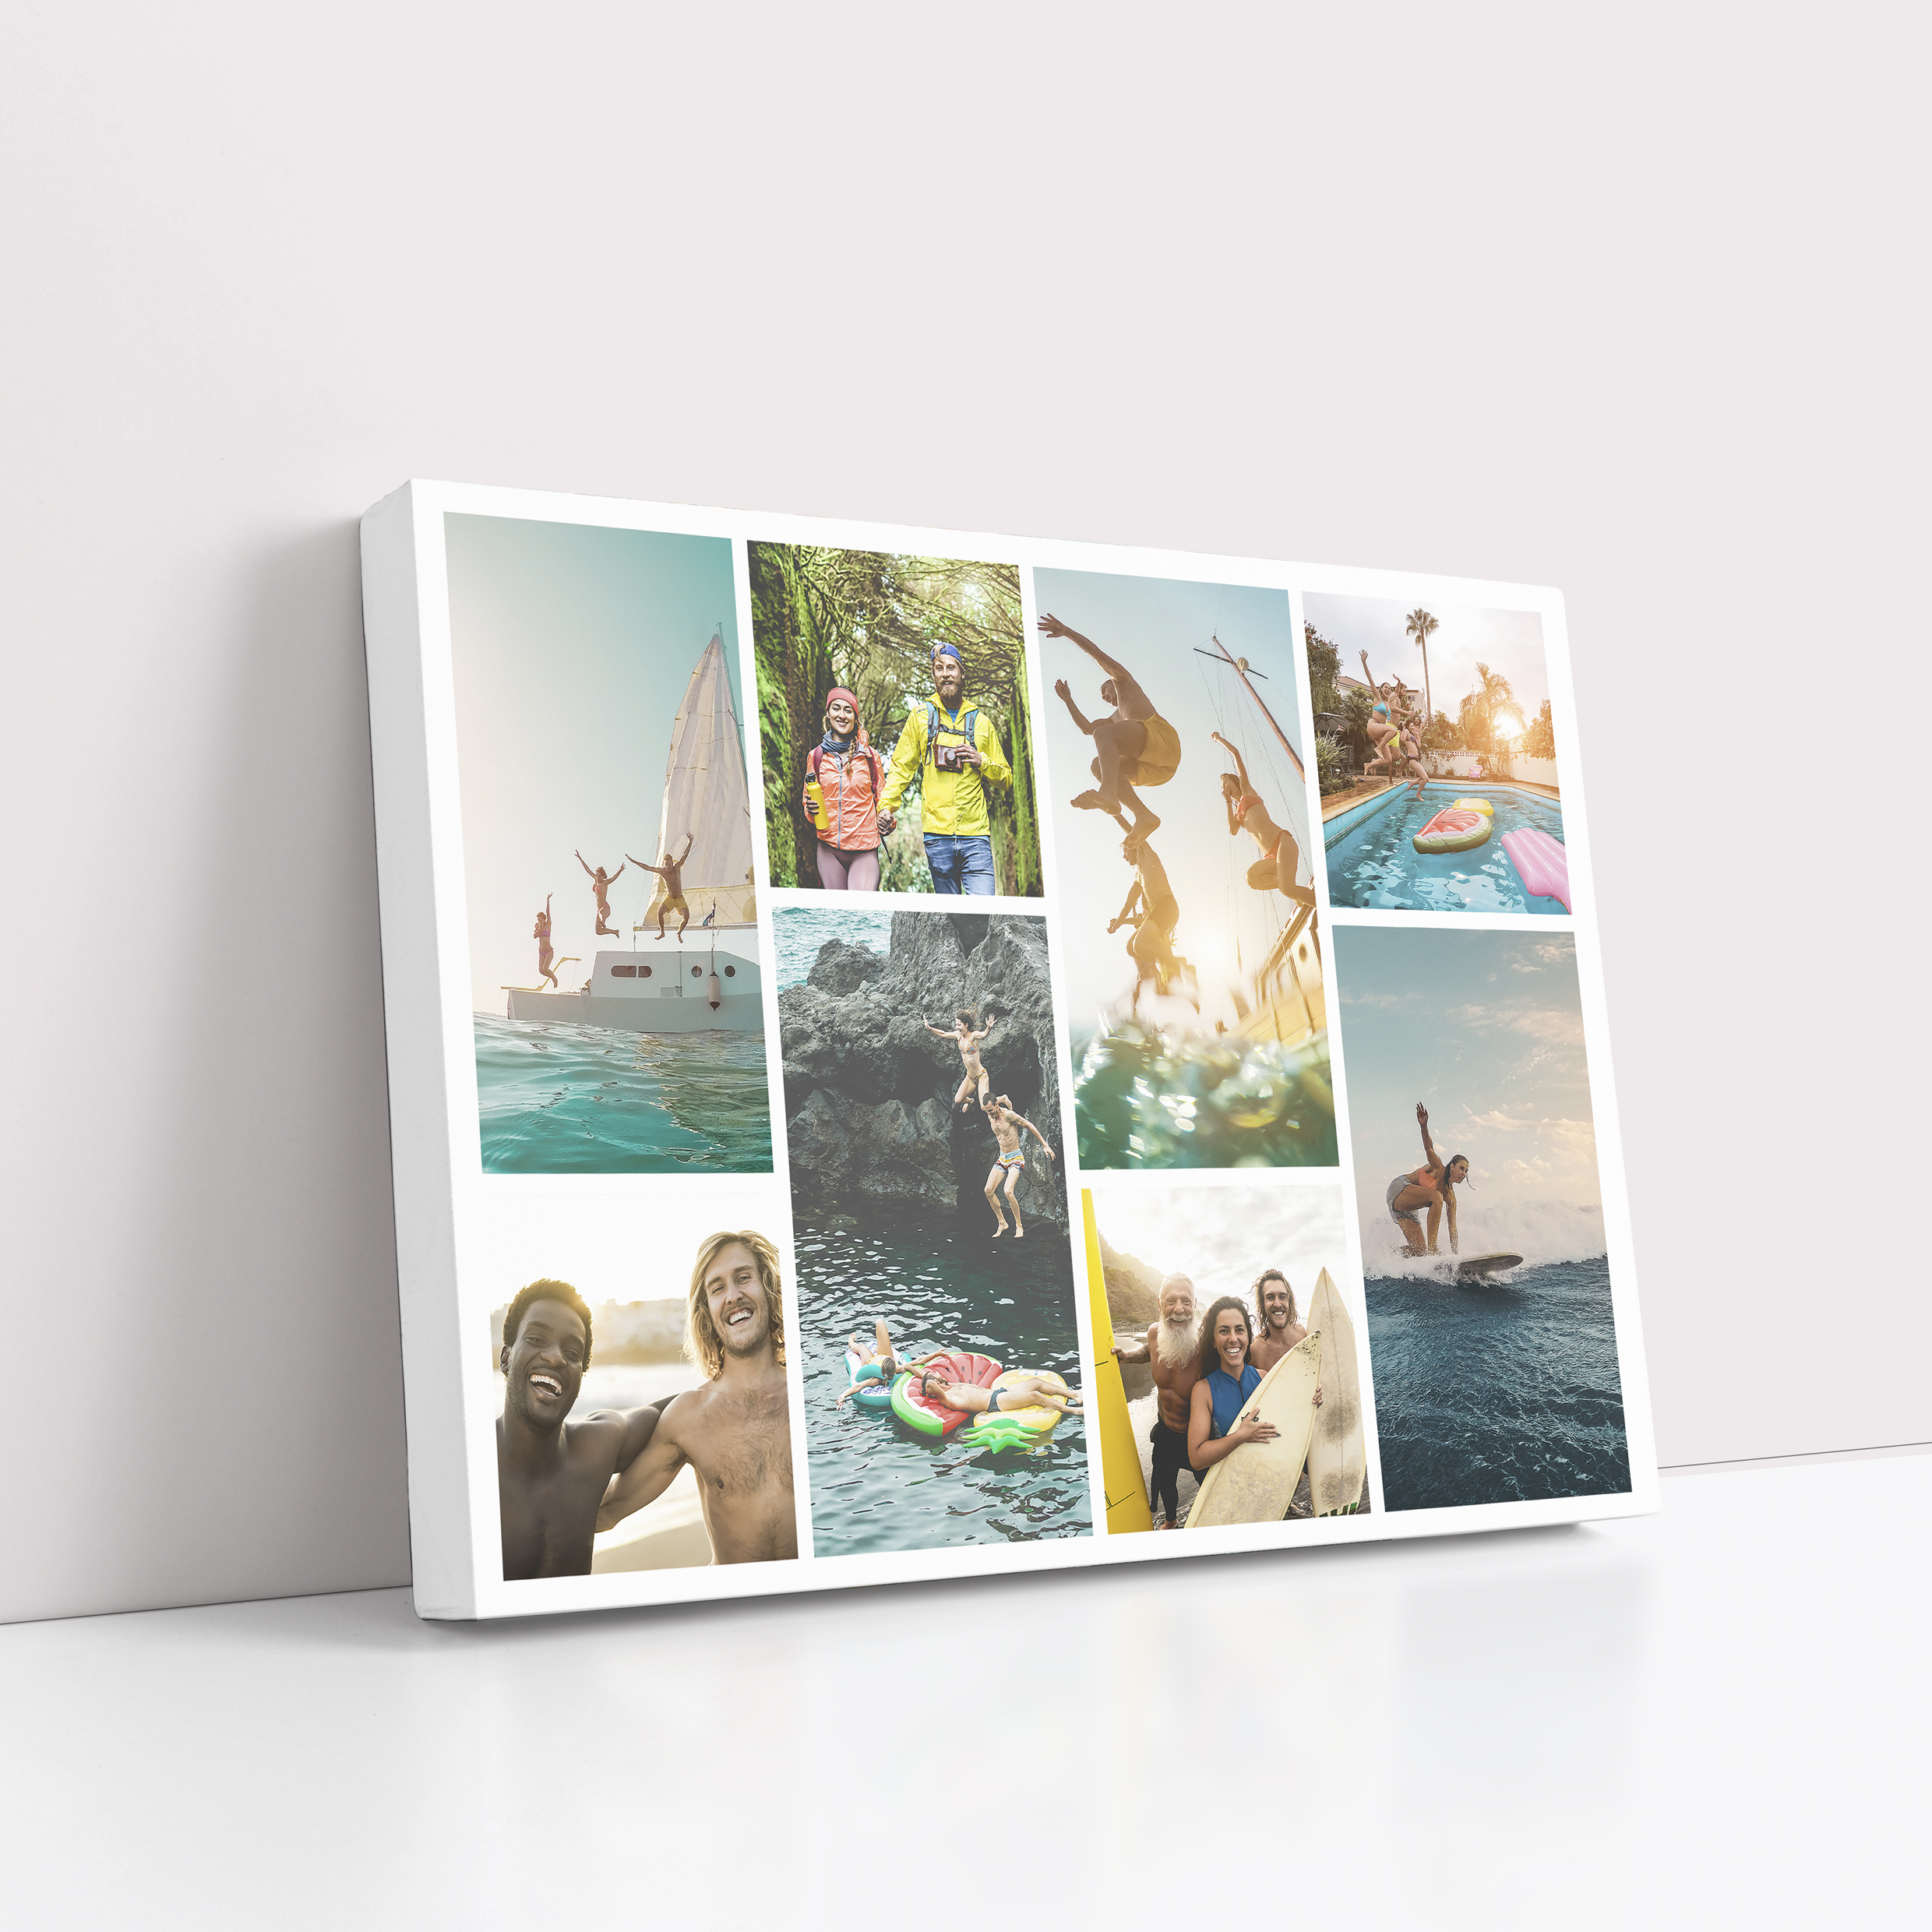  Personalized Shutter Montage Stretch Canvas Print - Create a Captivating Montage with 8 Photos